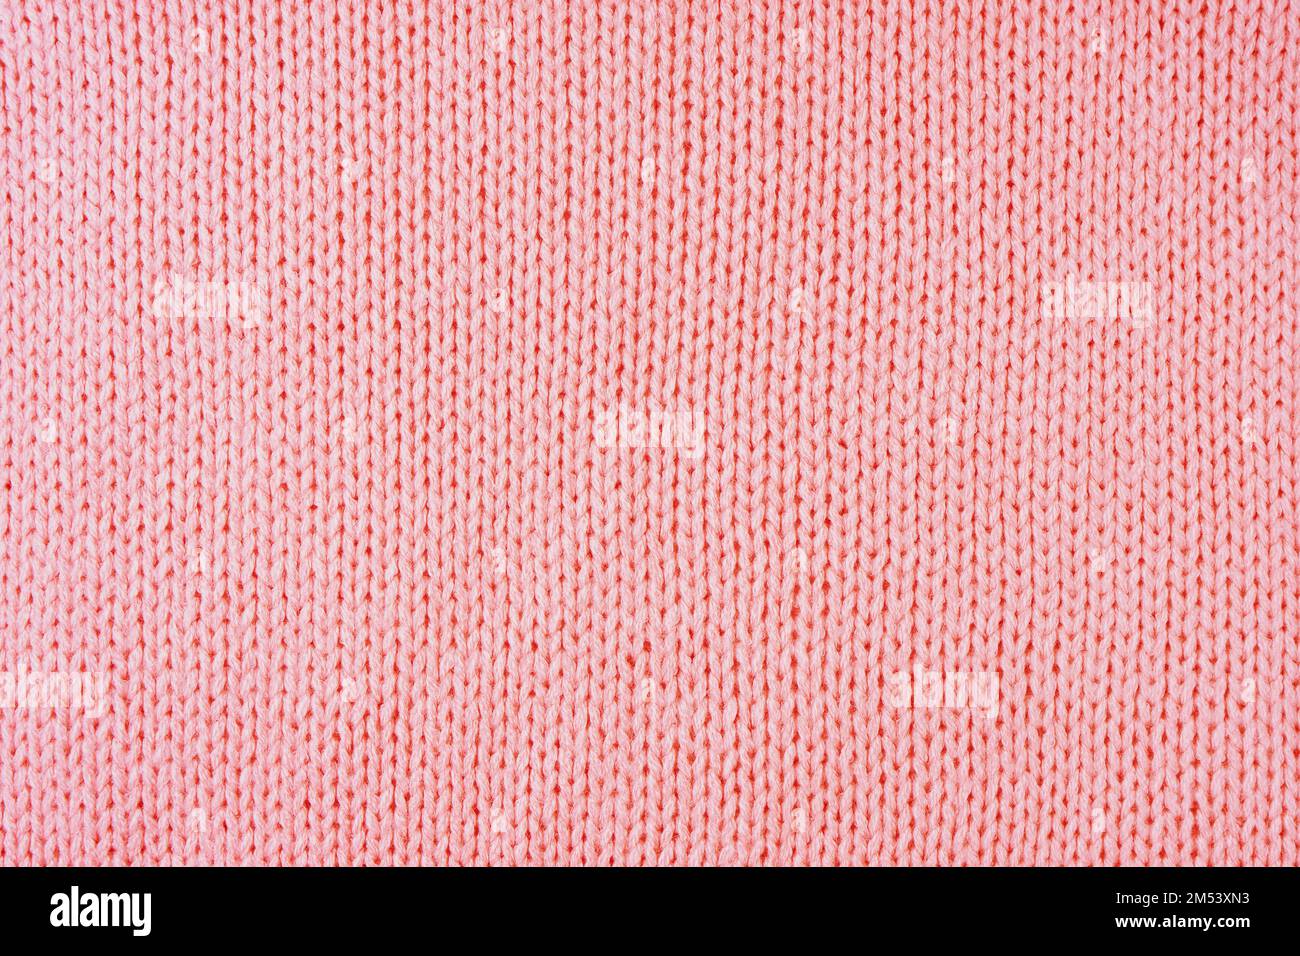 Close up background of knitted wool fabric made of viscose yarn. Pastel red color wool knitwear texture. Abstract knitted jersey background. Fabric ab Stock Photo